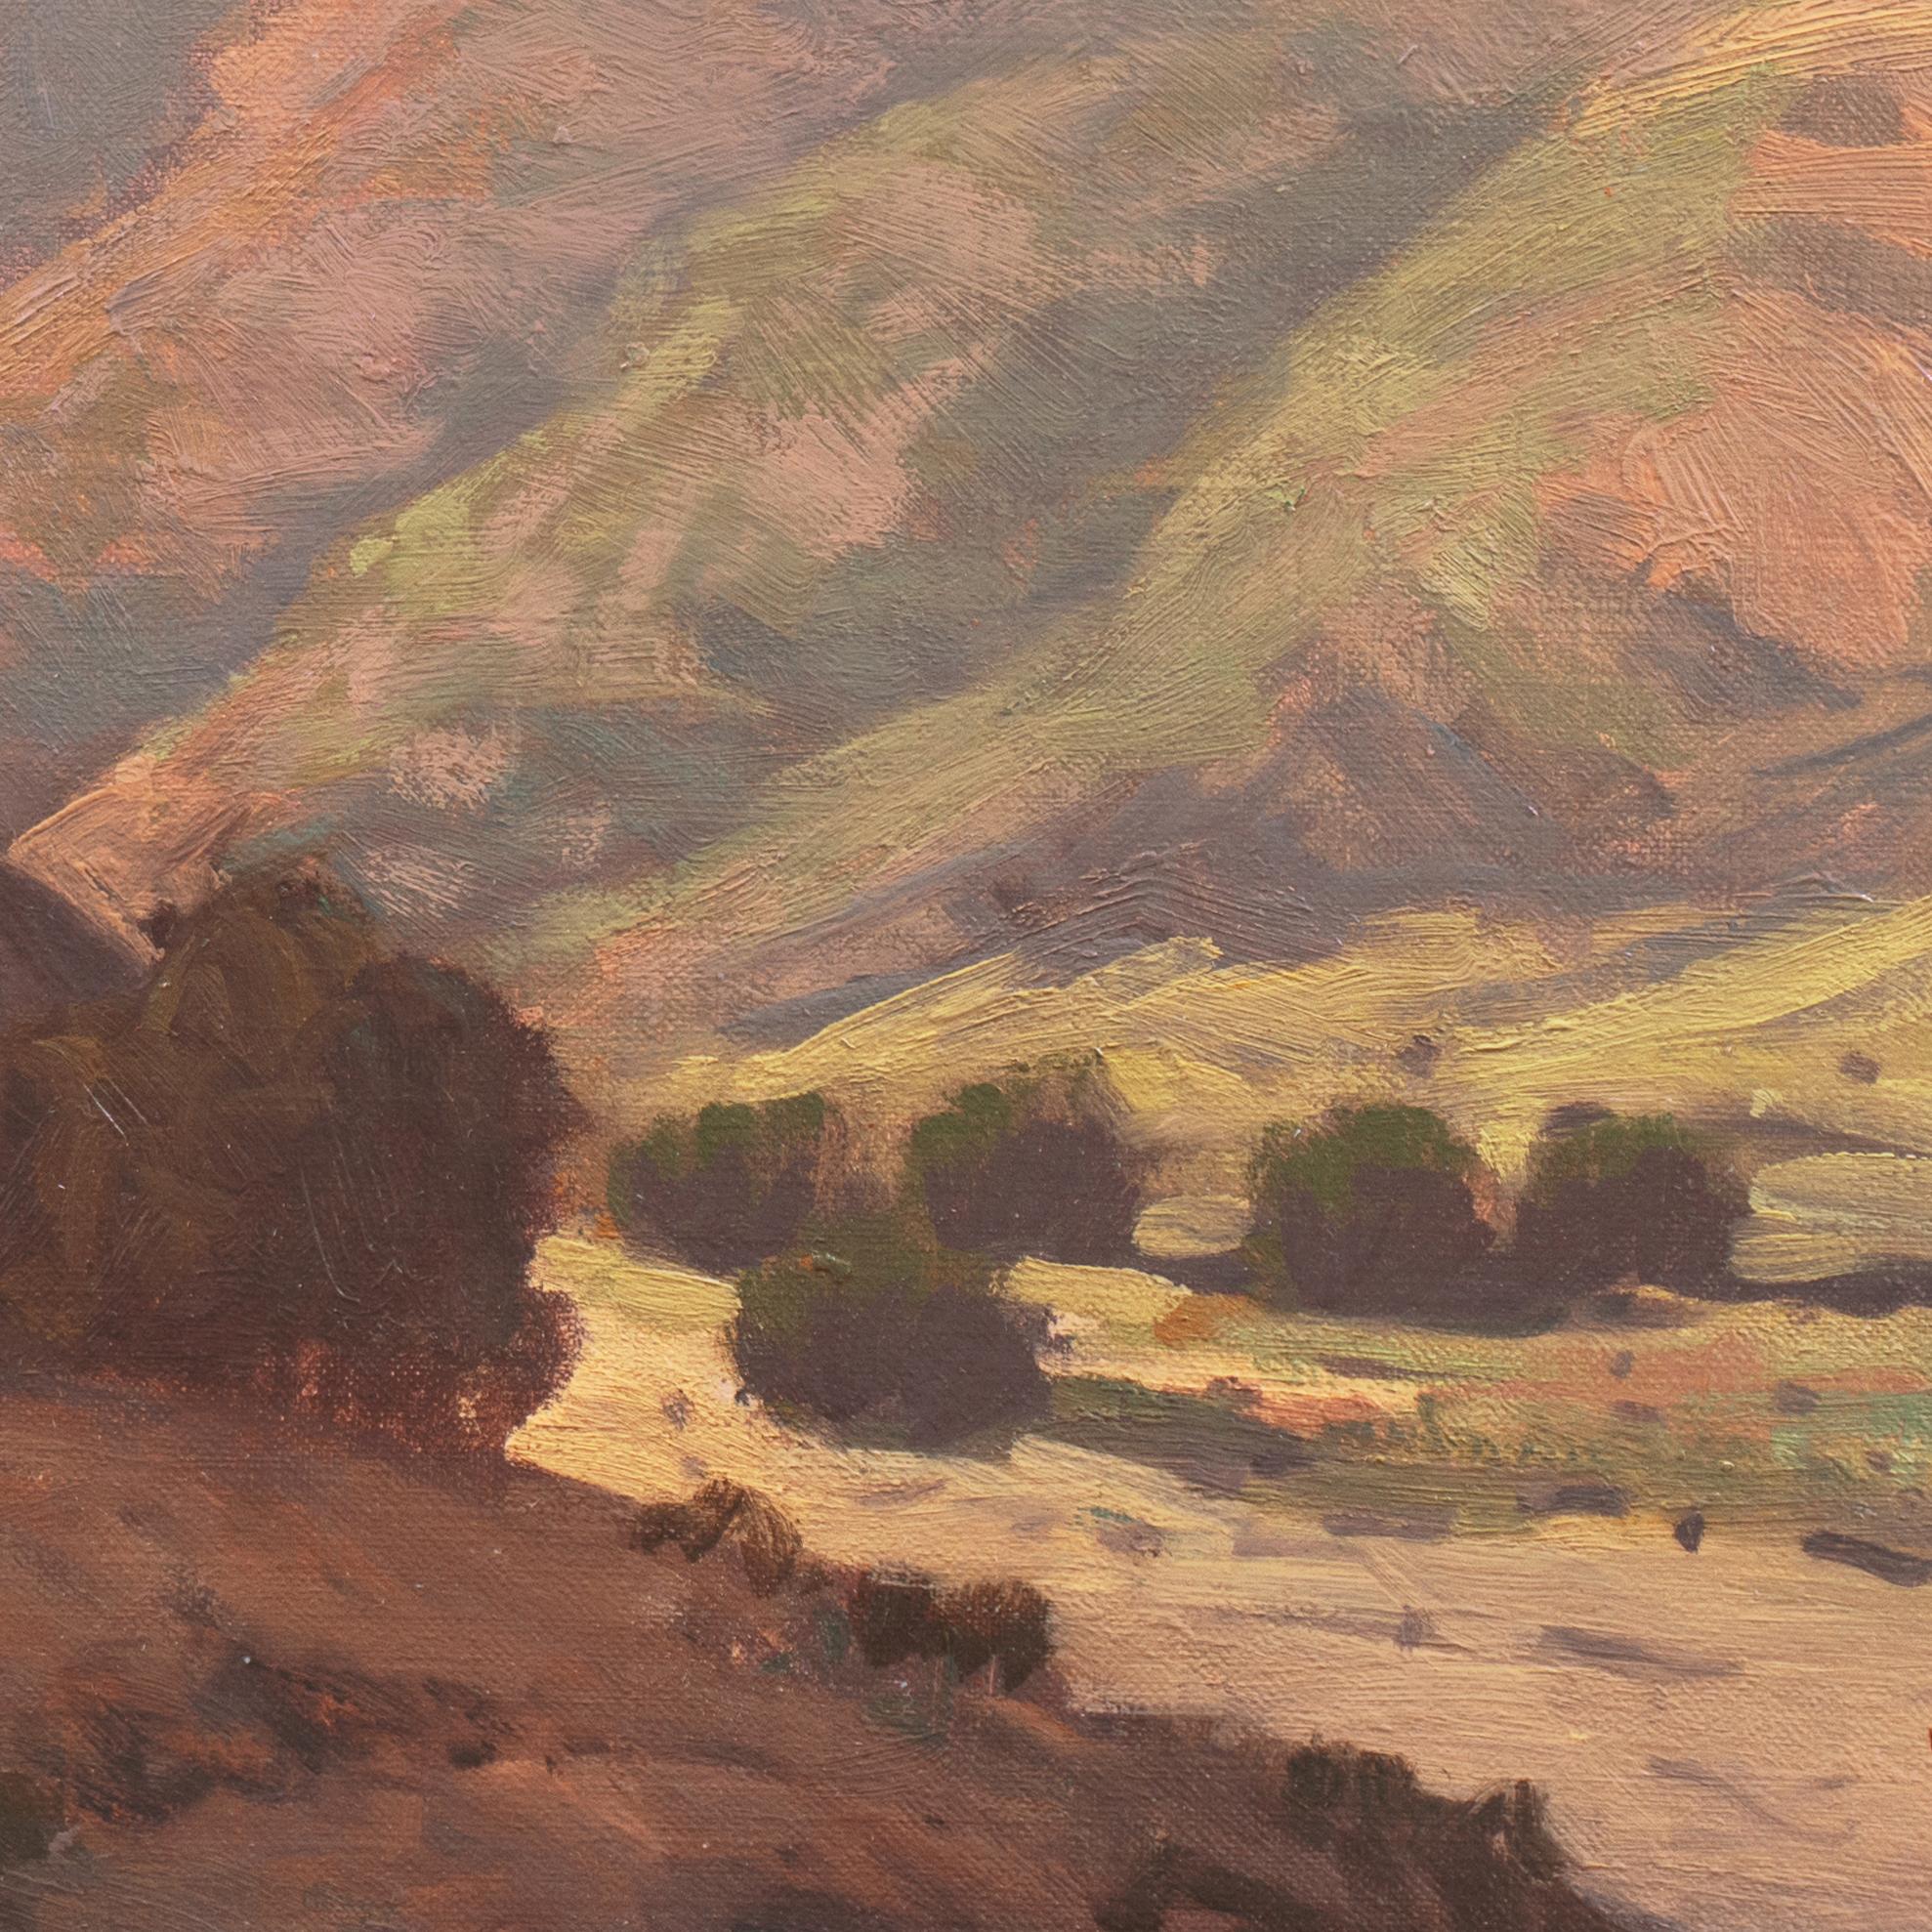 'California Sunset, Lilac and Rose', Palm Springs, Golden Gate Exhibition, LACMA - Brown Landscape Painting by William Krehm